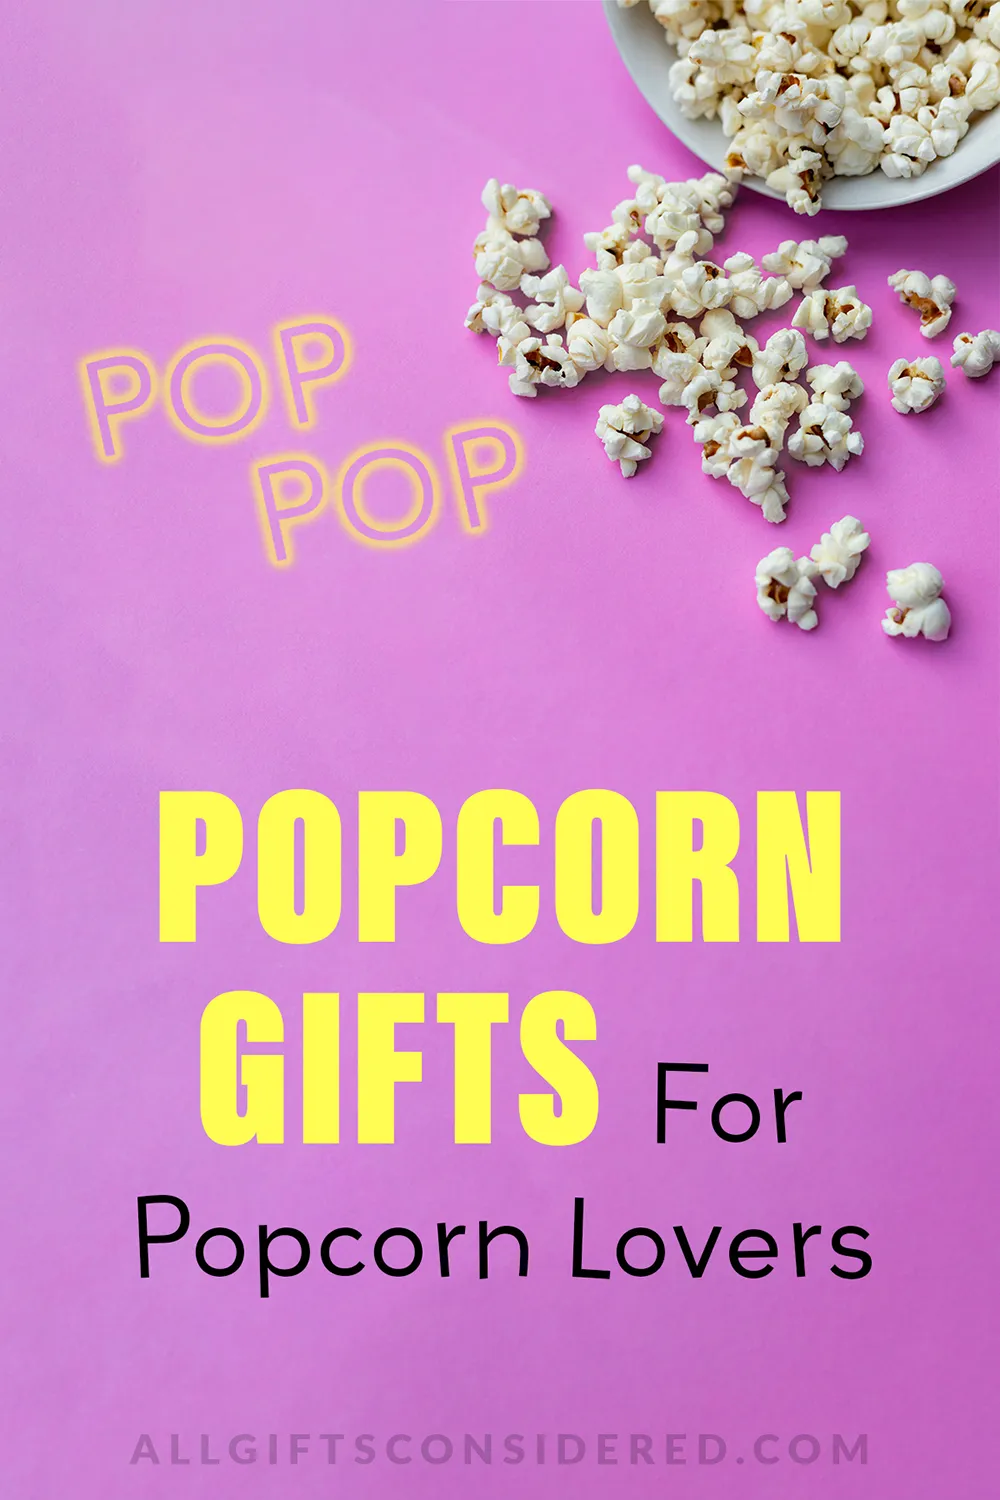 popcorn gifts - feature image